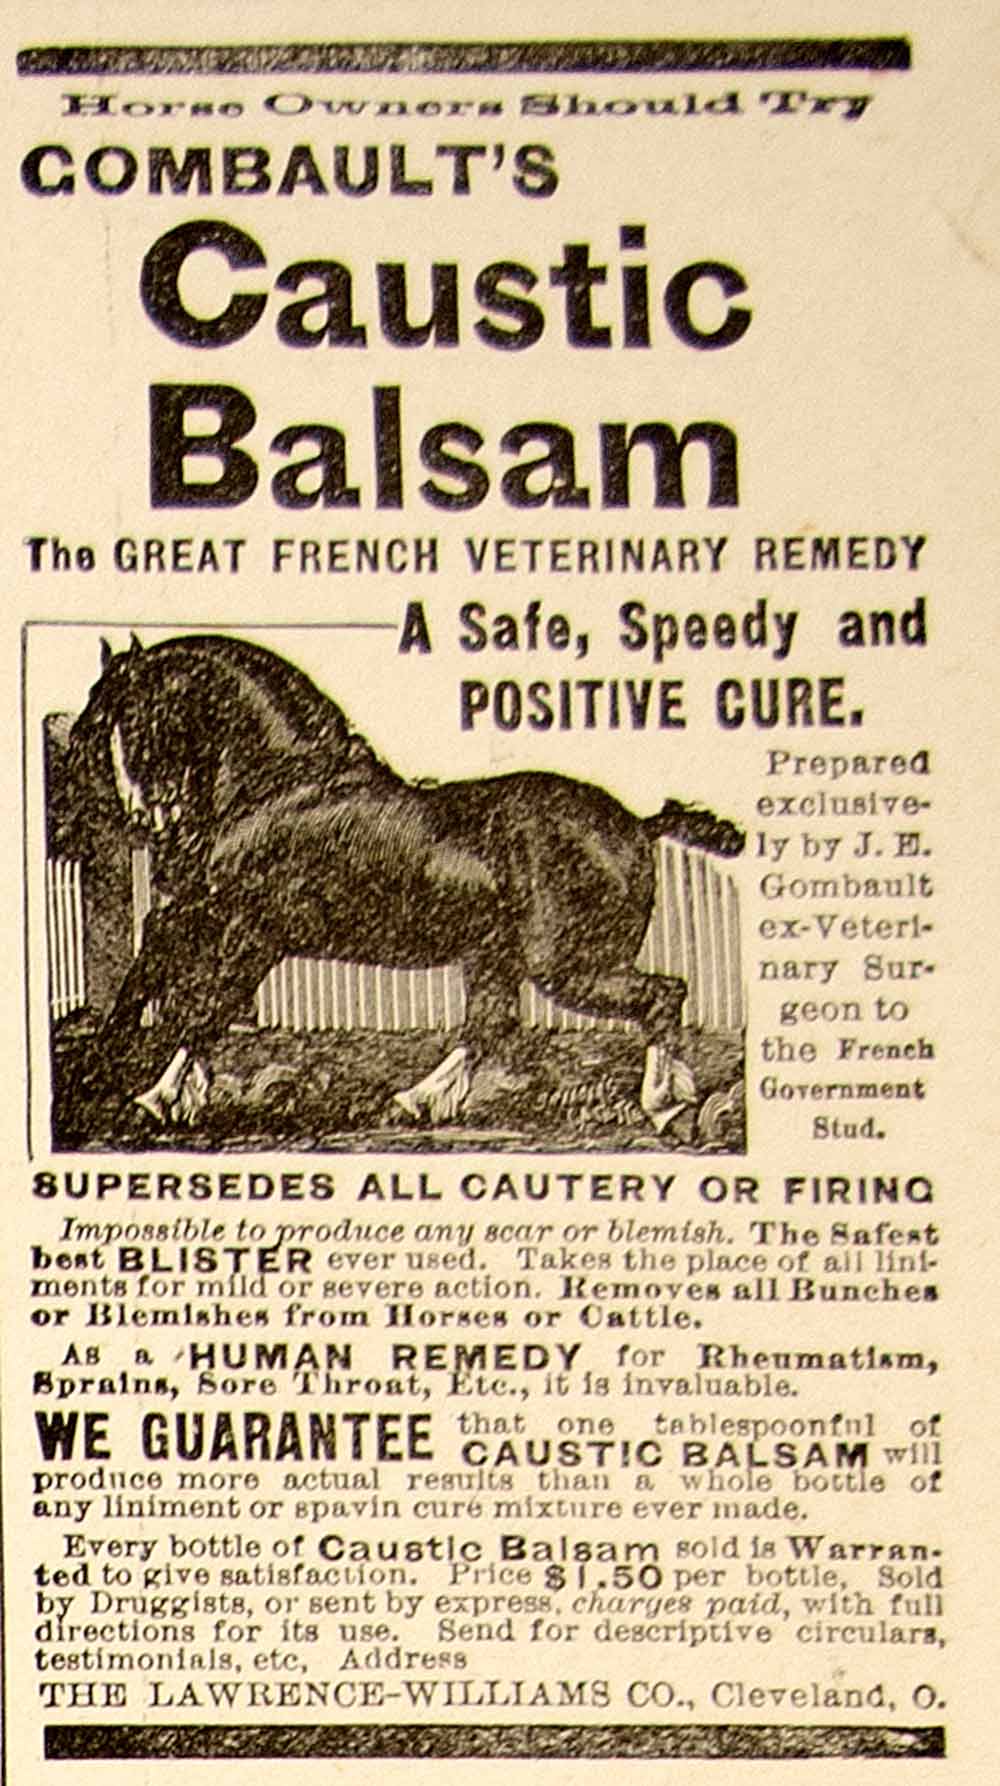 1896 Ad Antique Combault's Caustic Balsam Veterinary Remedy Horse Cure YAHB1